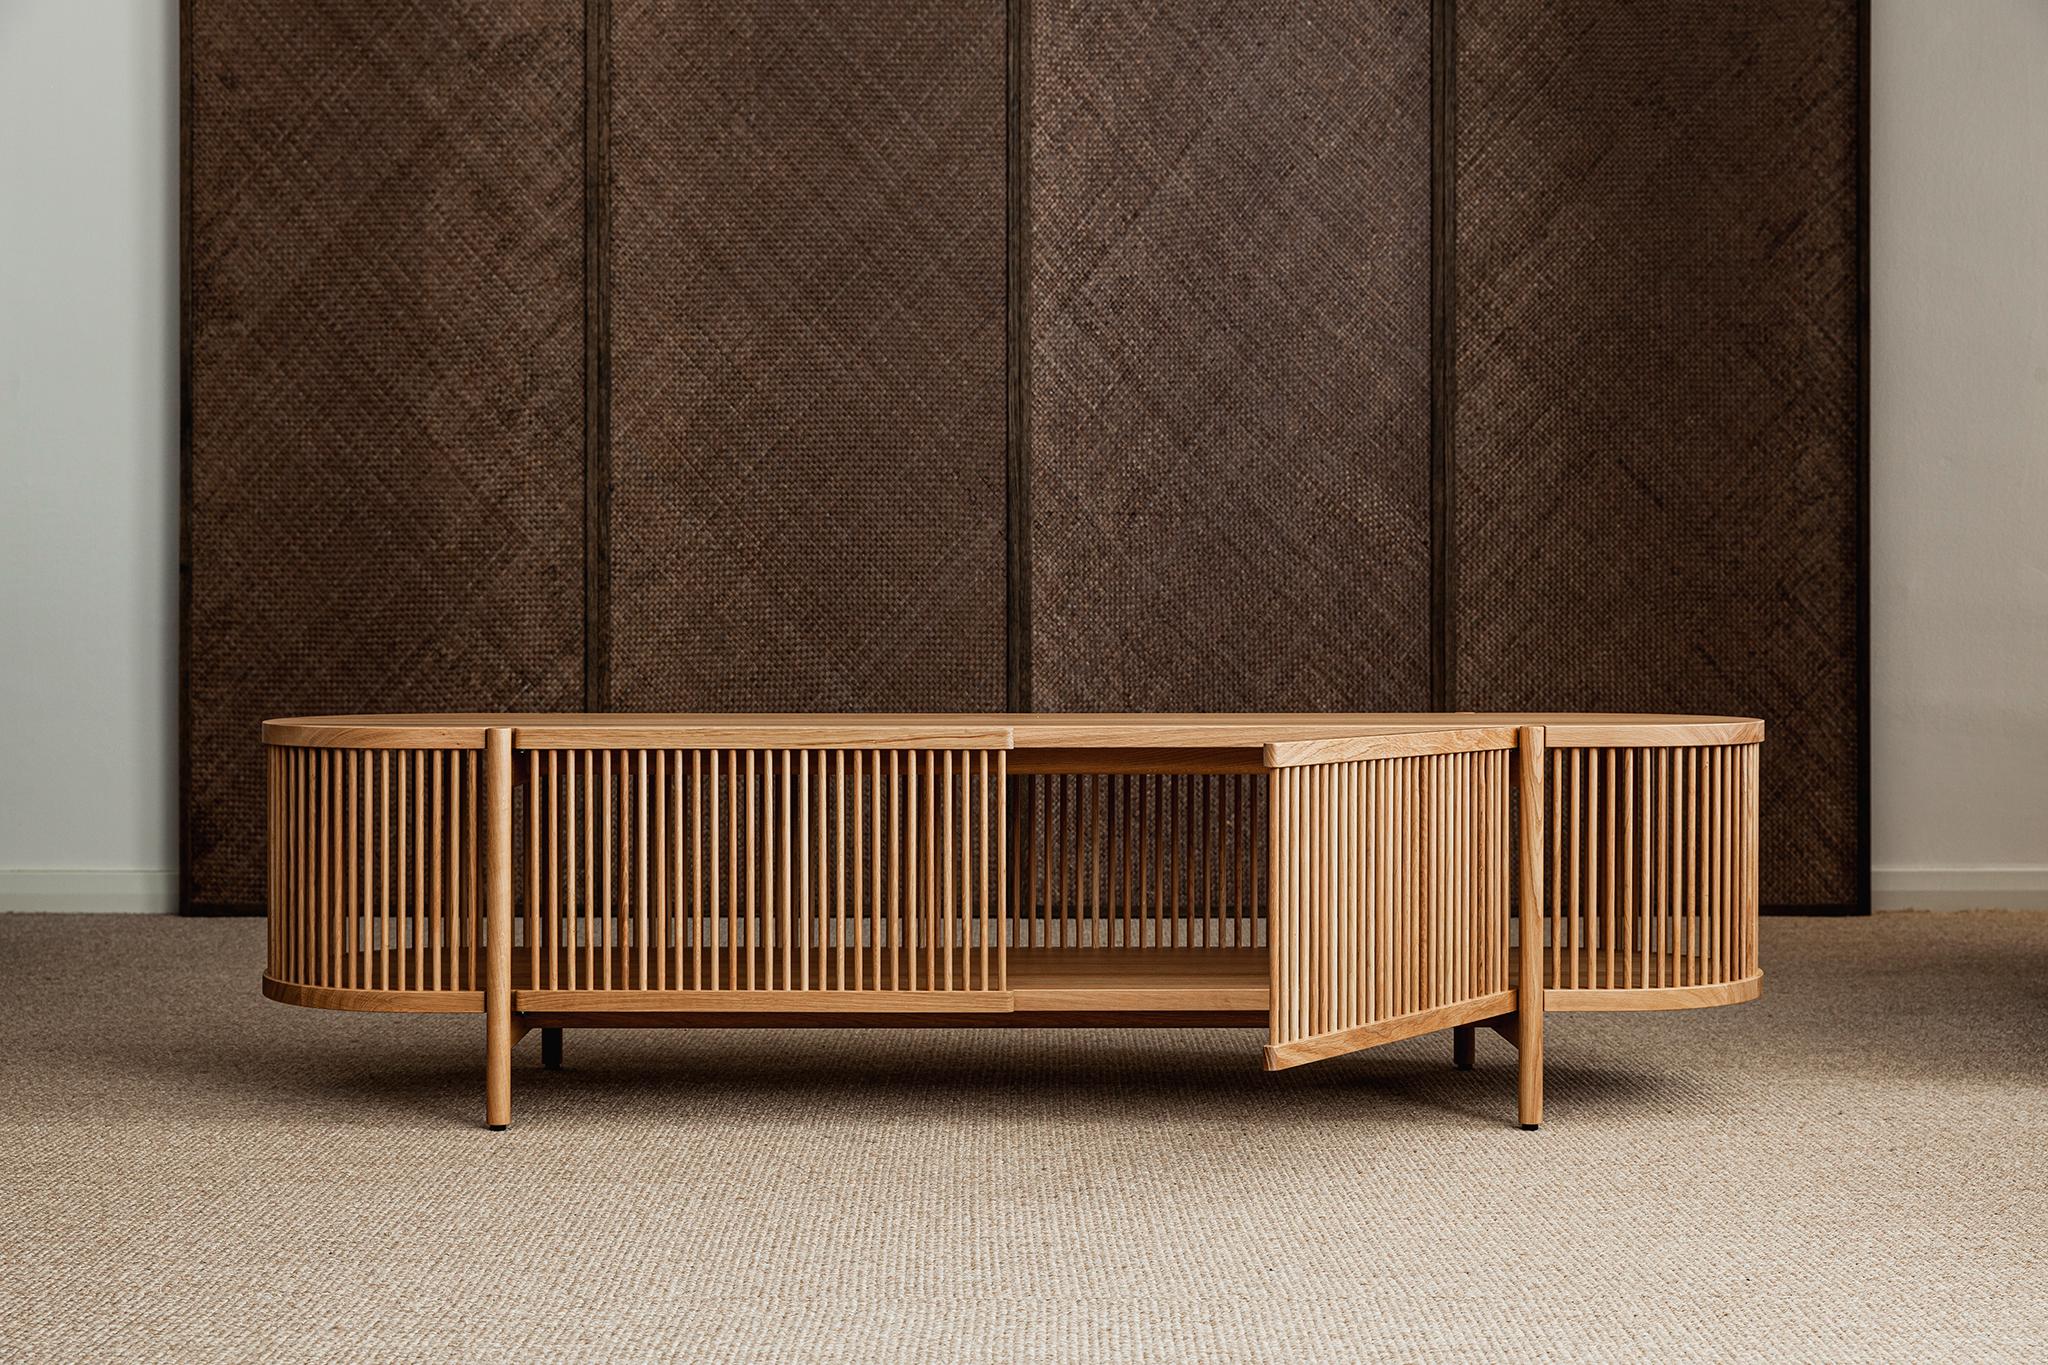 Low sideboard Bastone // Oak 
Designed by Antrei Hartikainen, 2022

Dimensions : H. 50 cm / W. 200 cm / D. 53 cm

Model shown in the picture : 
- Color : Oak 
- With doors

Designed by the award-winning master cabinet maker and designer